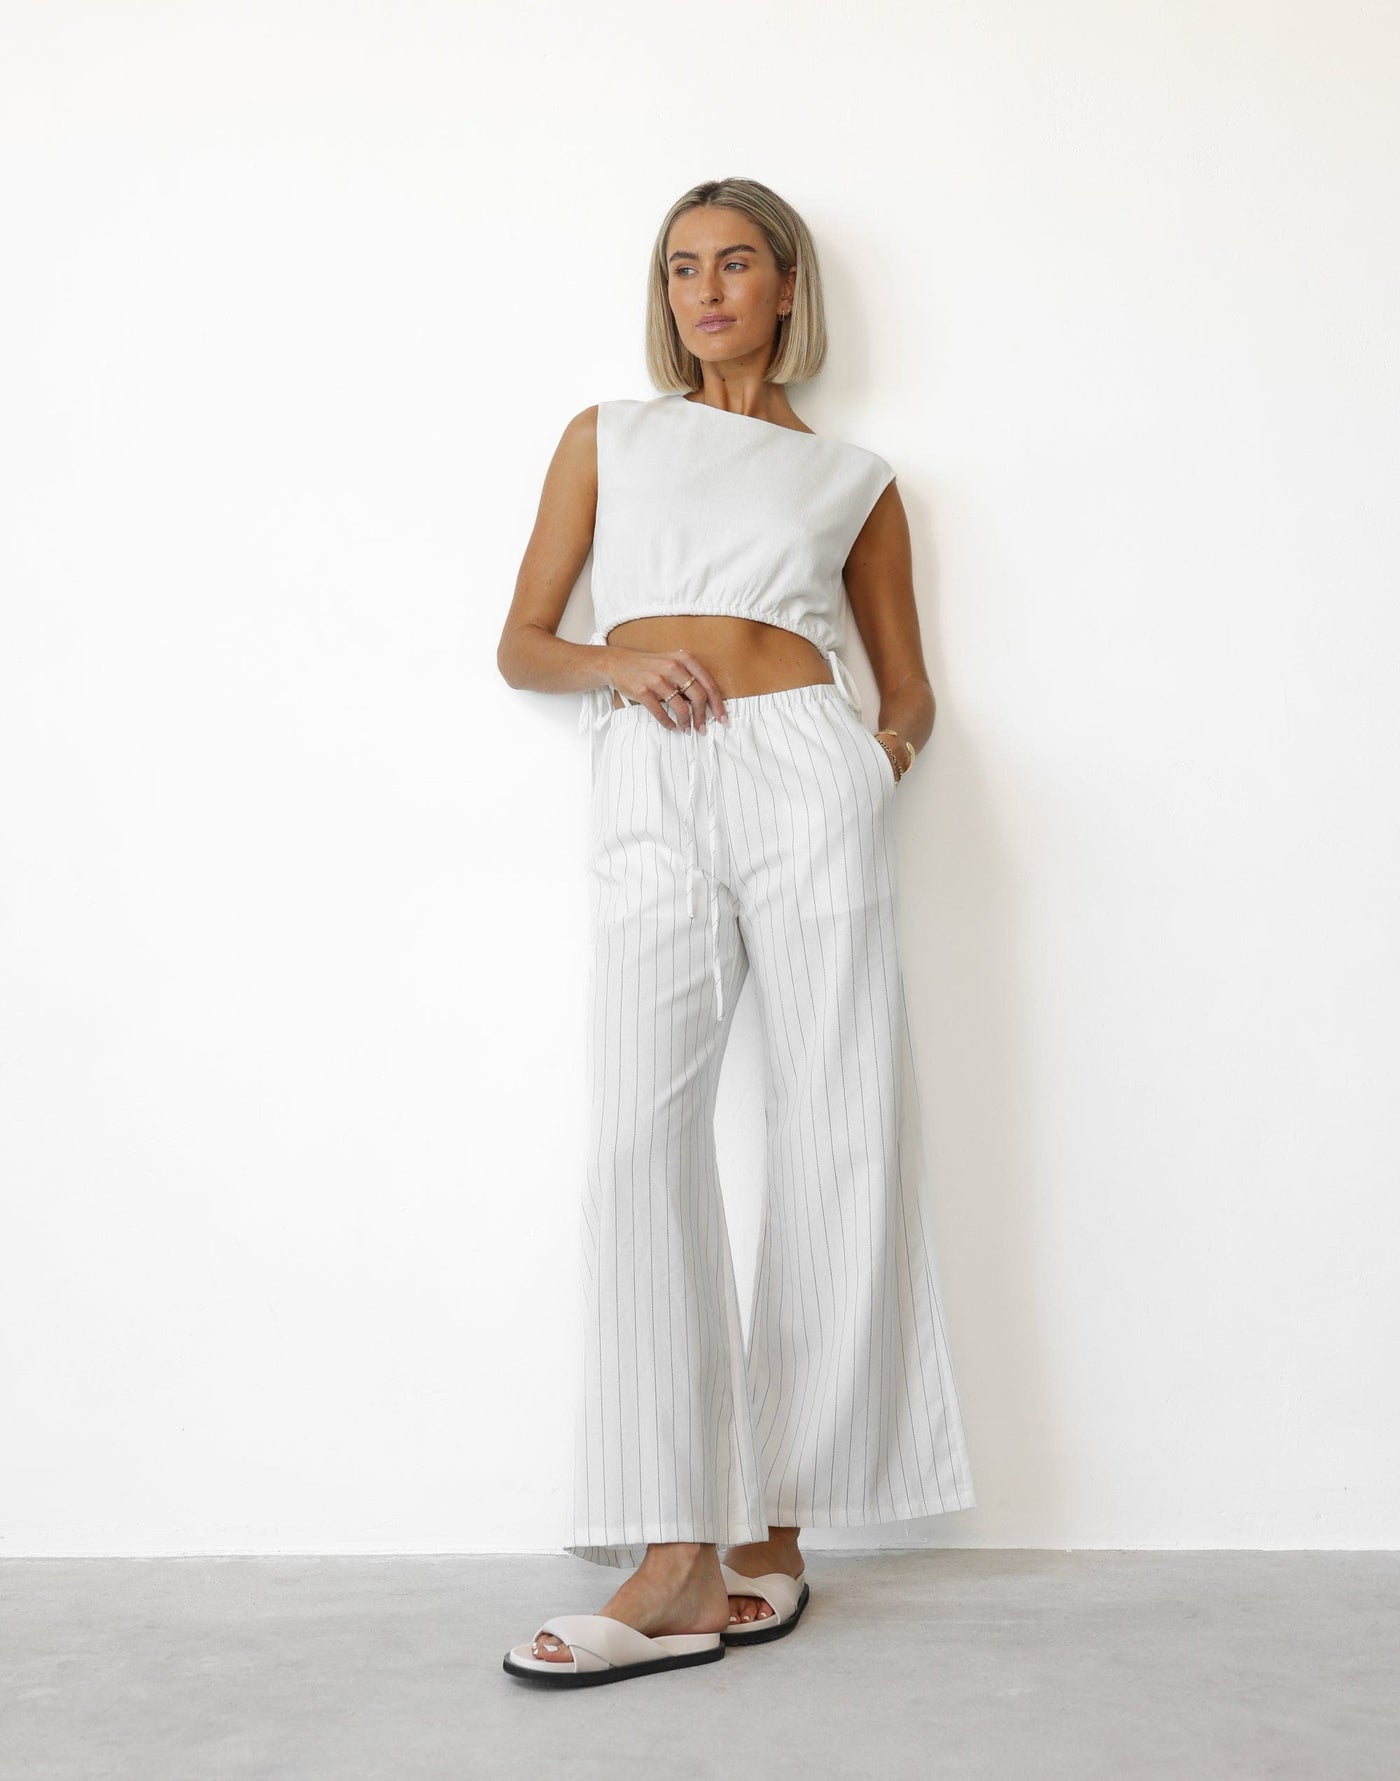 Charlie Pants (White Pinstripe) | CHARCOAL Exclusive - Elasticated Waistband Tie Up Flared Leg Pant - Women's Pants - Charcoal Clothing